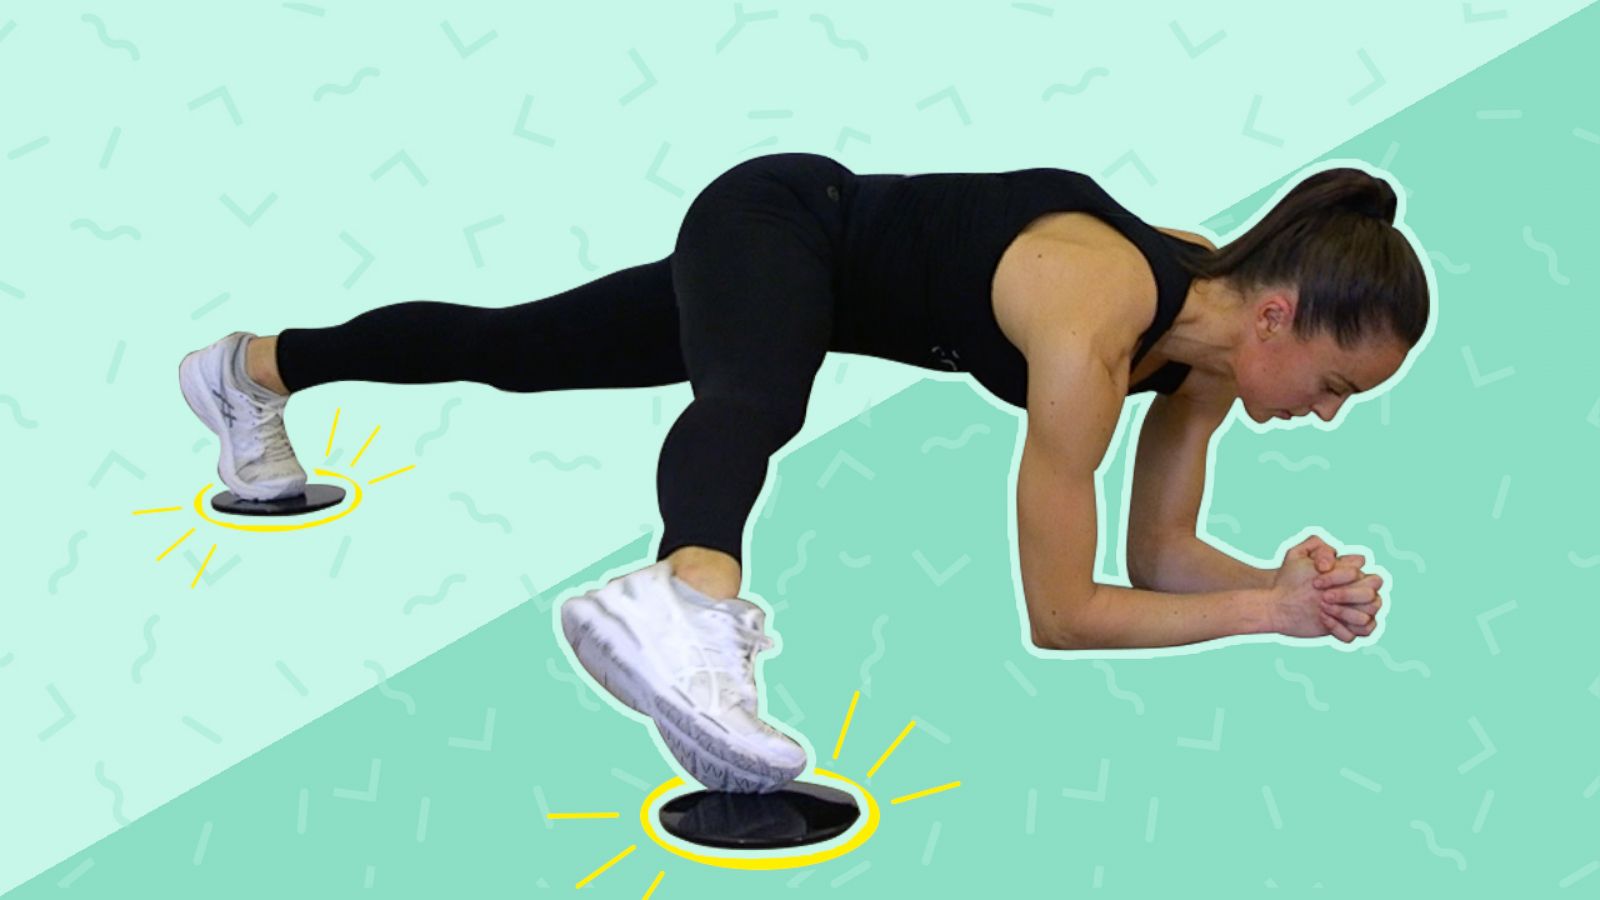 4 Fun Sliders Exercises That Will Trim & Sculpt Your Entire Body (Video)